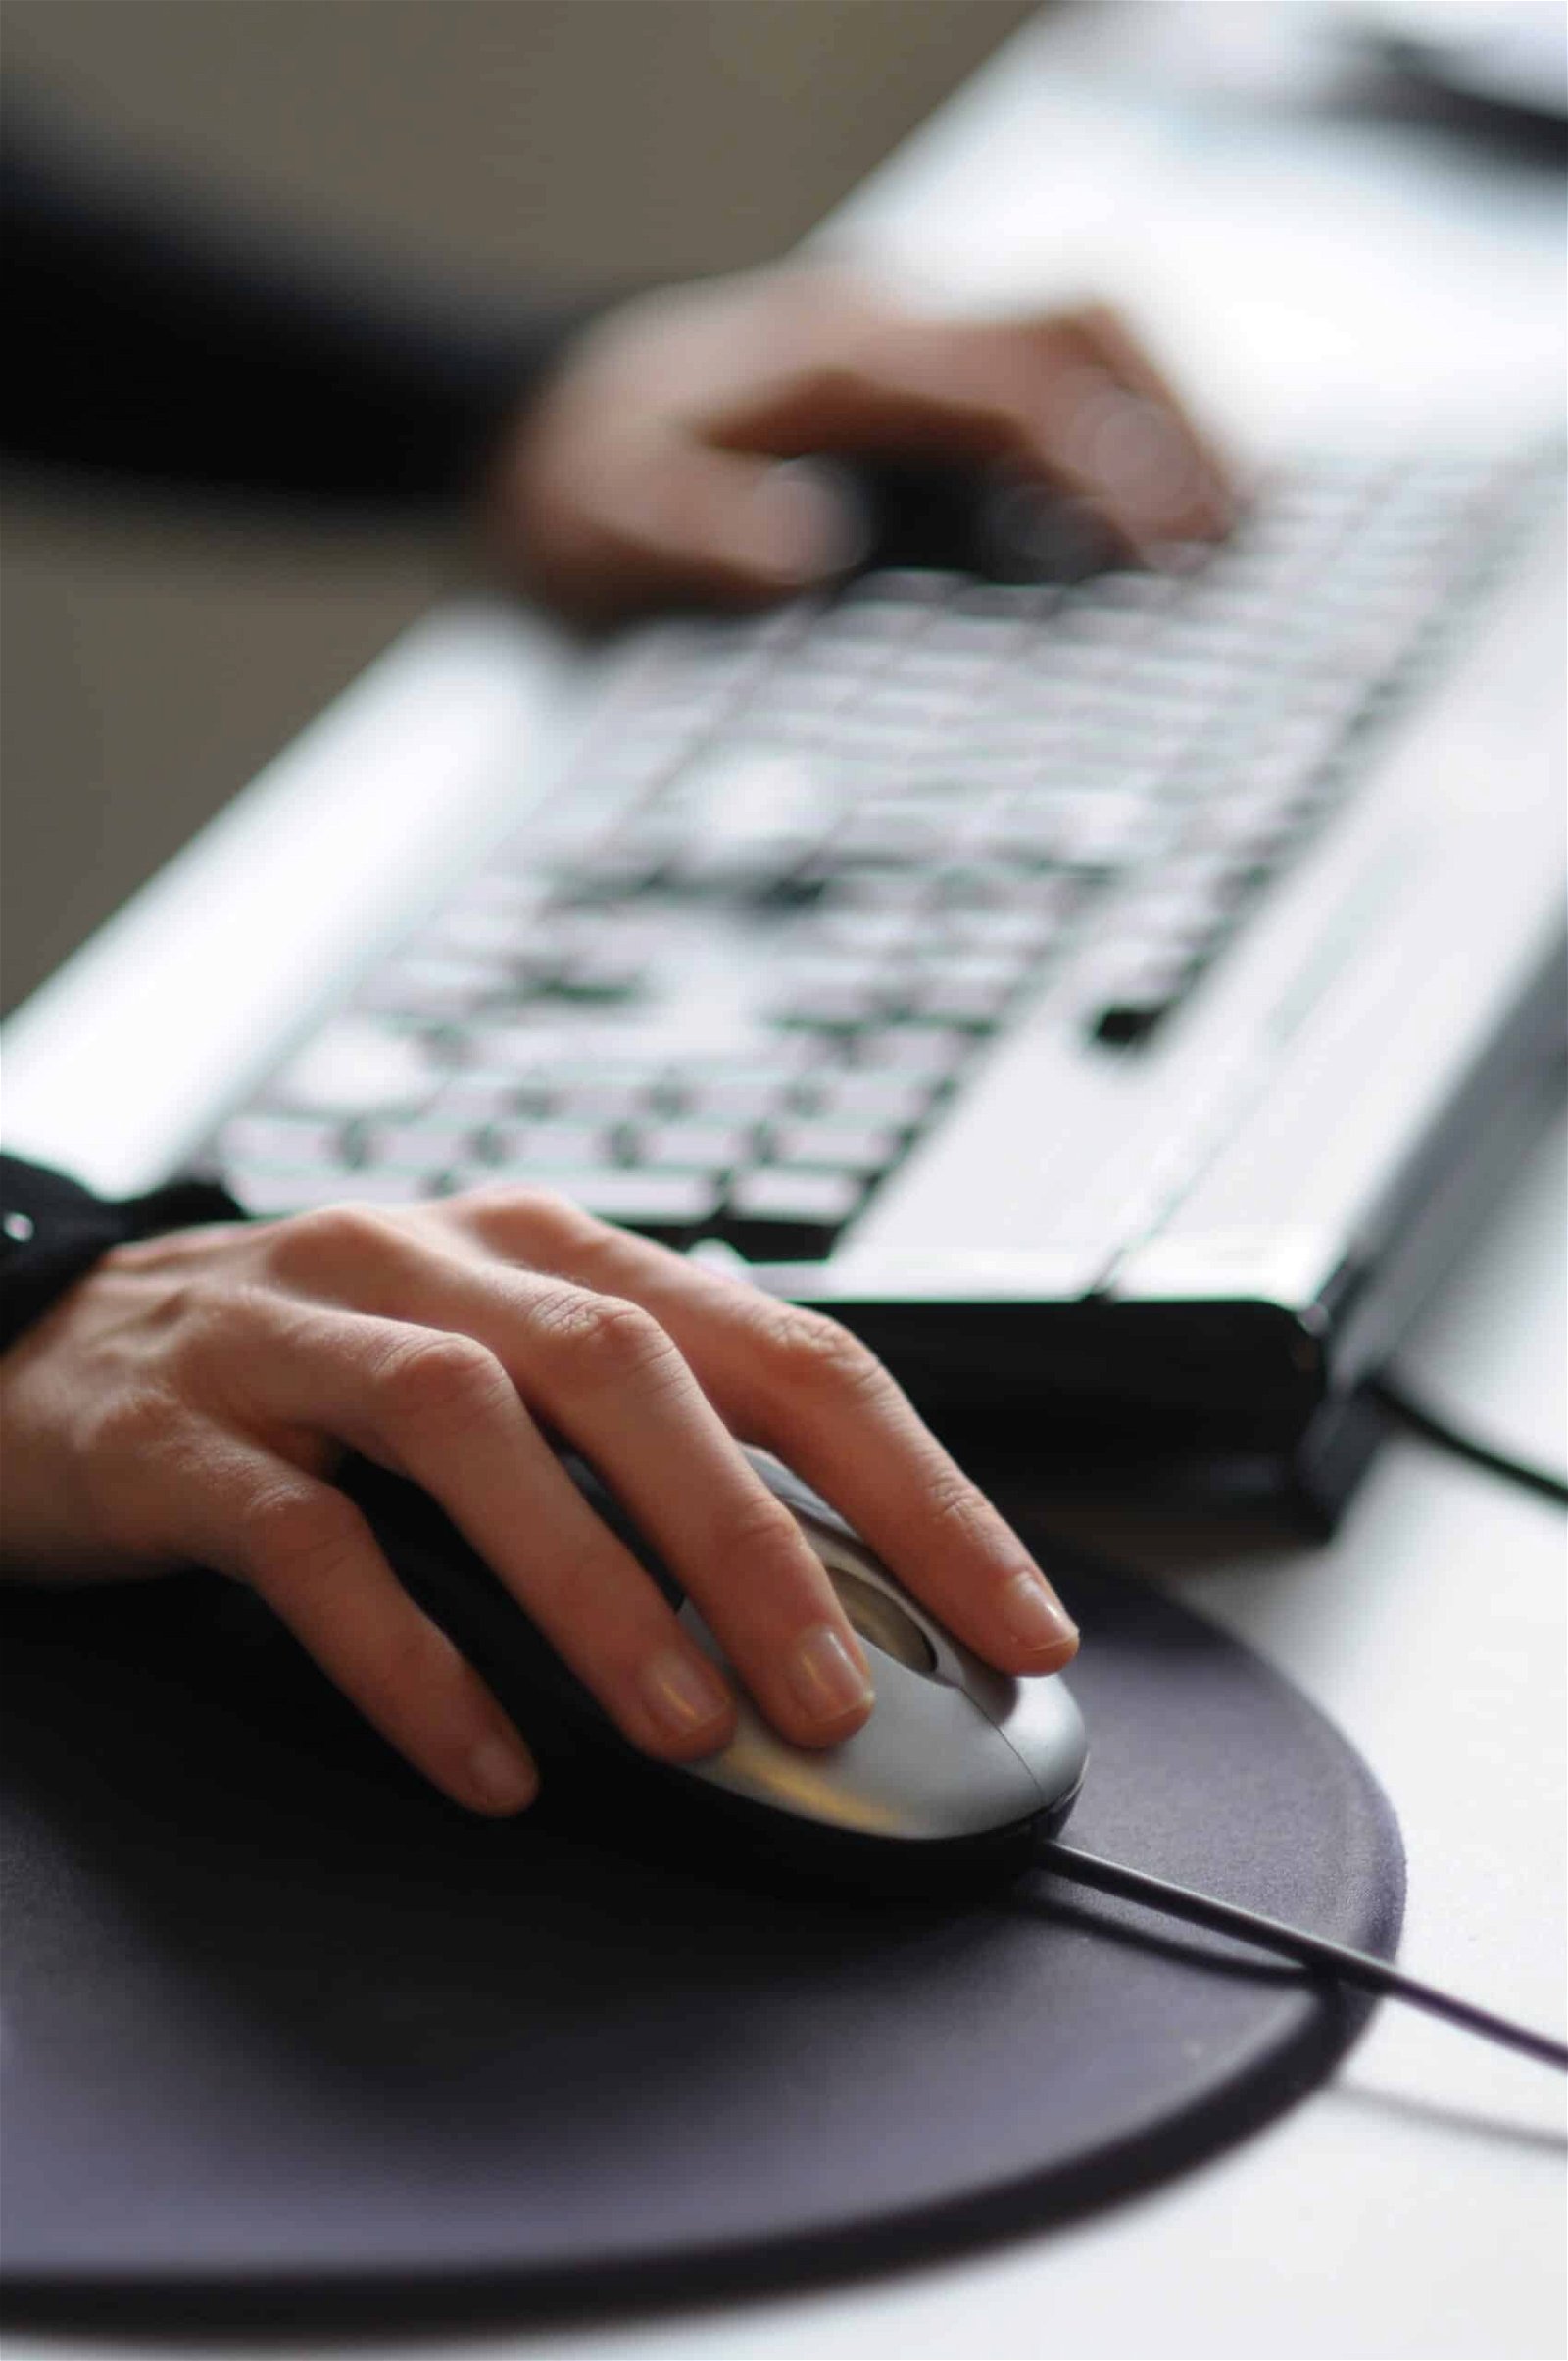 Close-up of a person's hand using a computer mouse with a keyboard in the background.